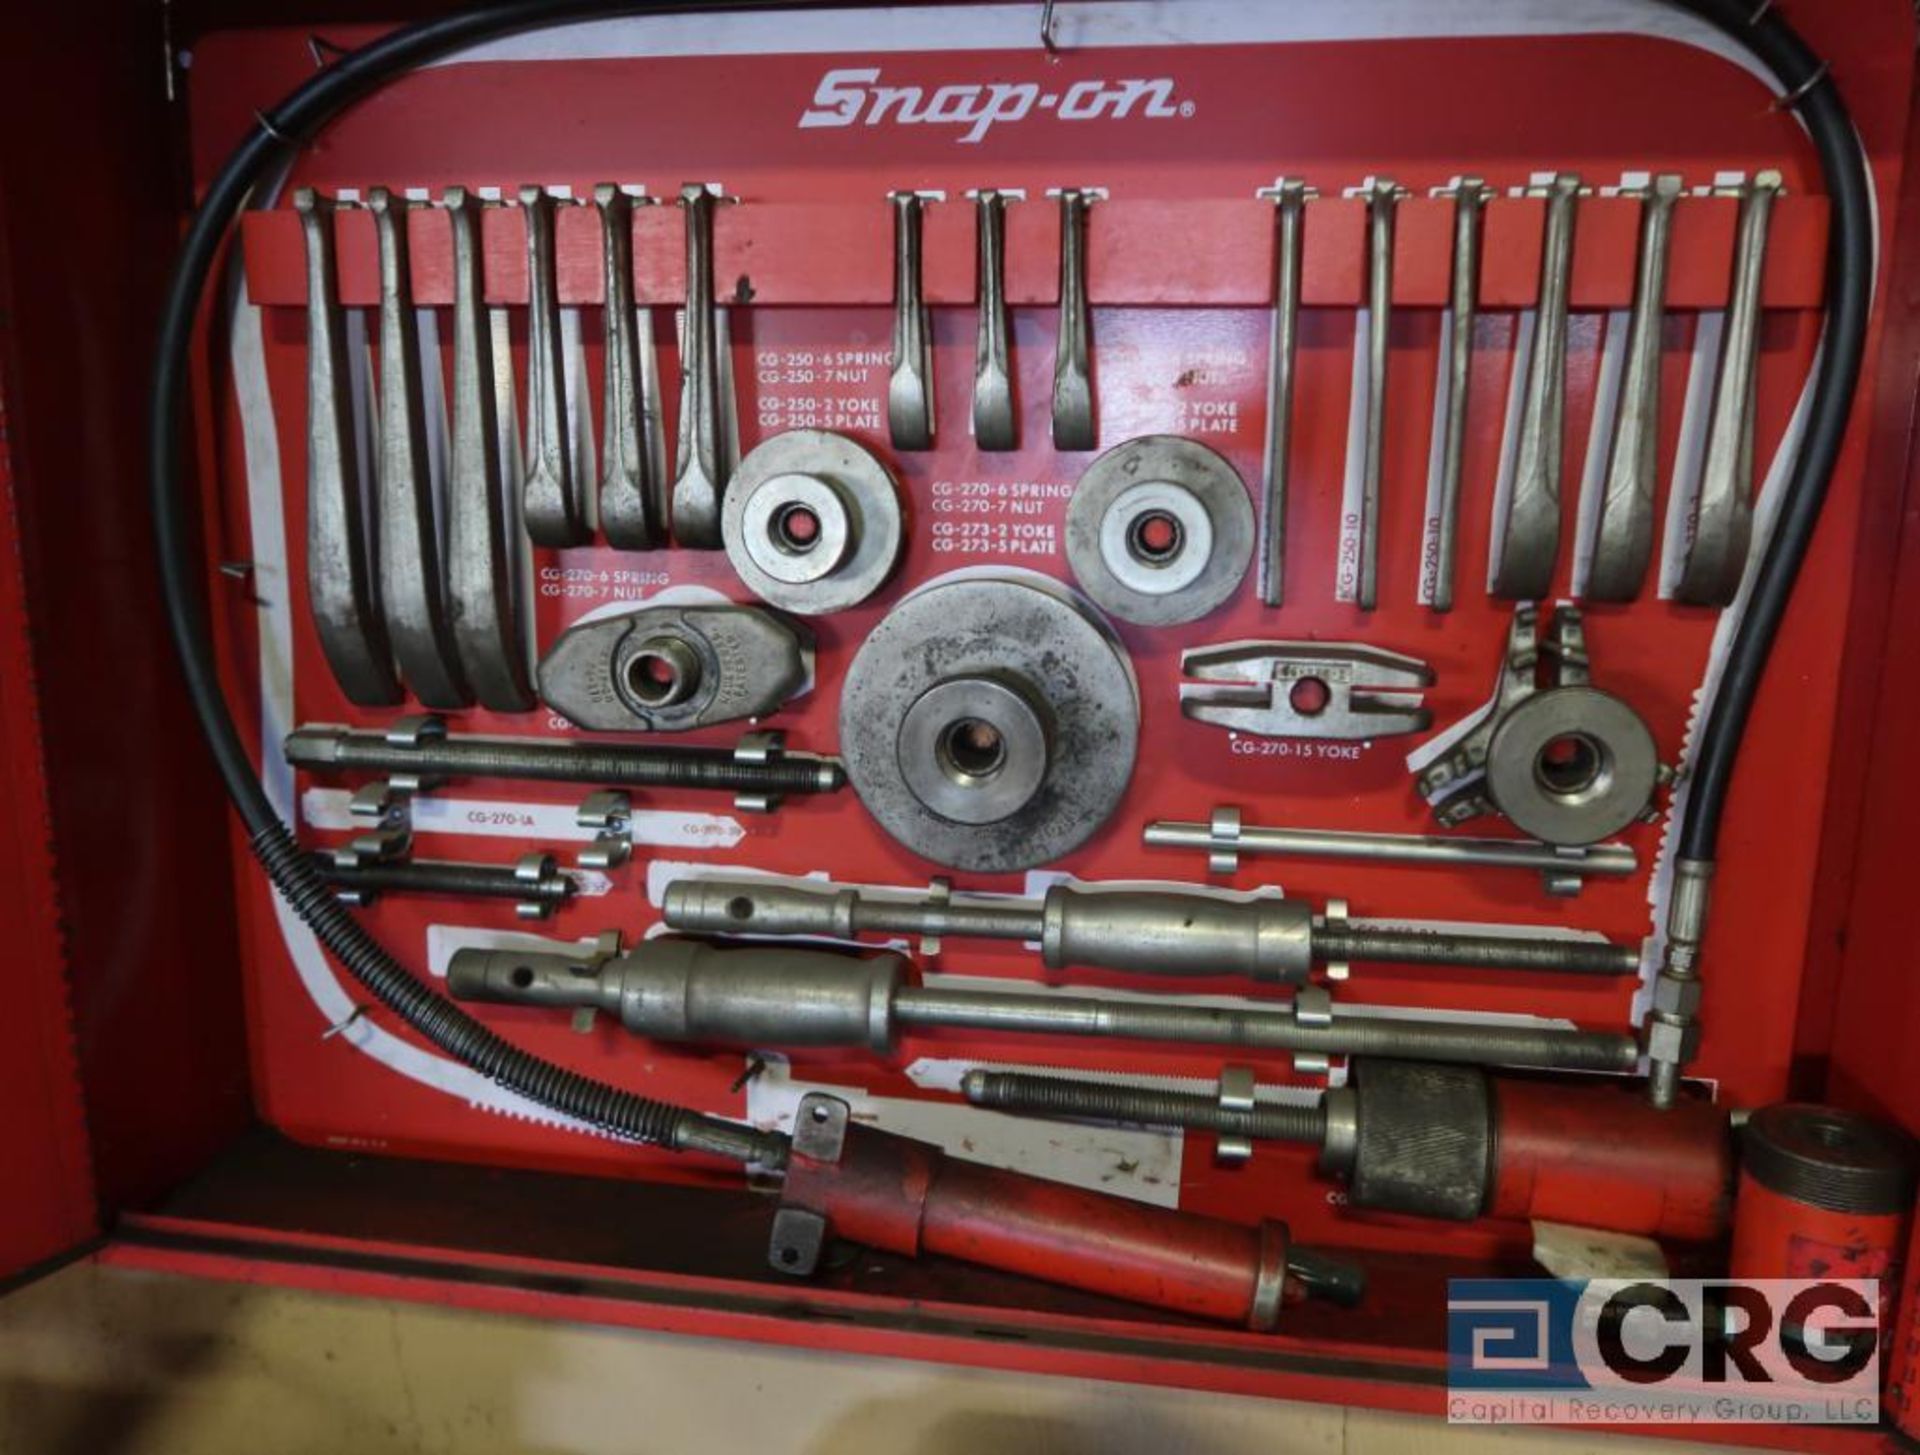 Snap On gear puller with manual hydraulic pump, wall mounted (Maintenance Shop) - Image 2 of 2